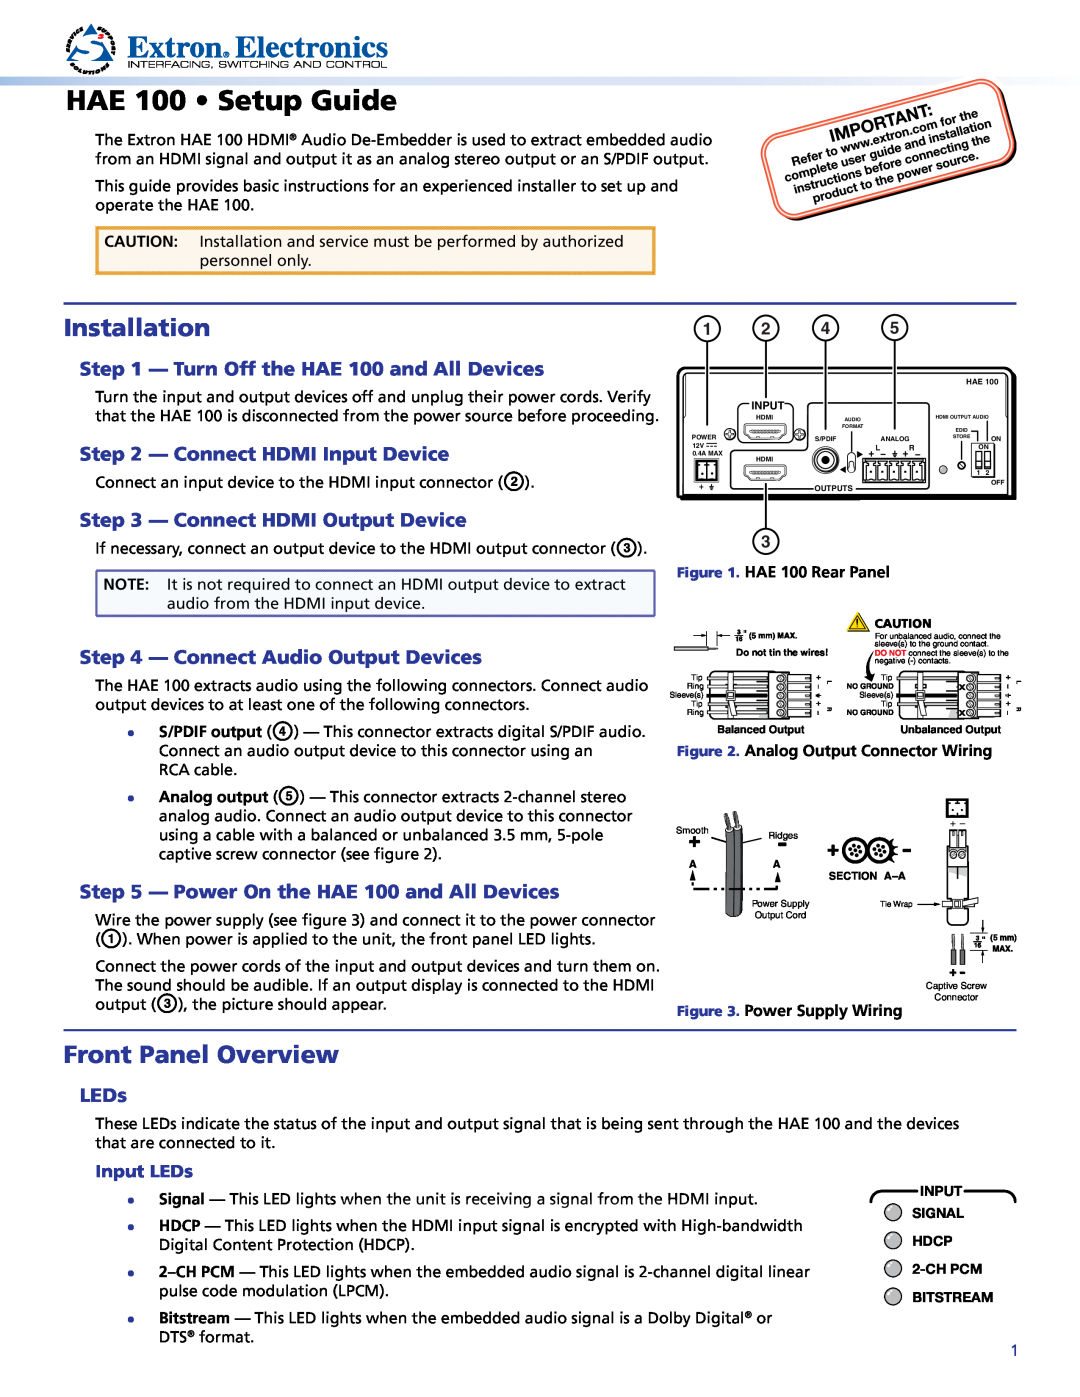 Extron electronic 150 setup guide Included Parts, Mount Devices on the Shelf, UTS 100 Series Setup Guide, Uts 